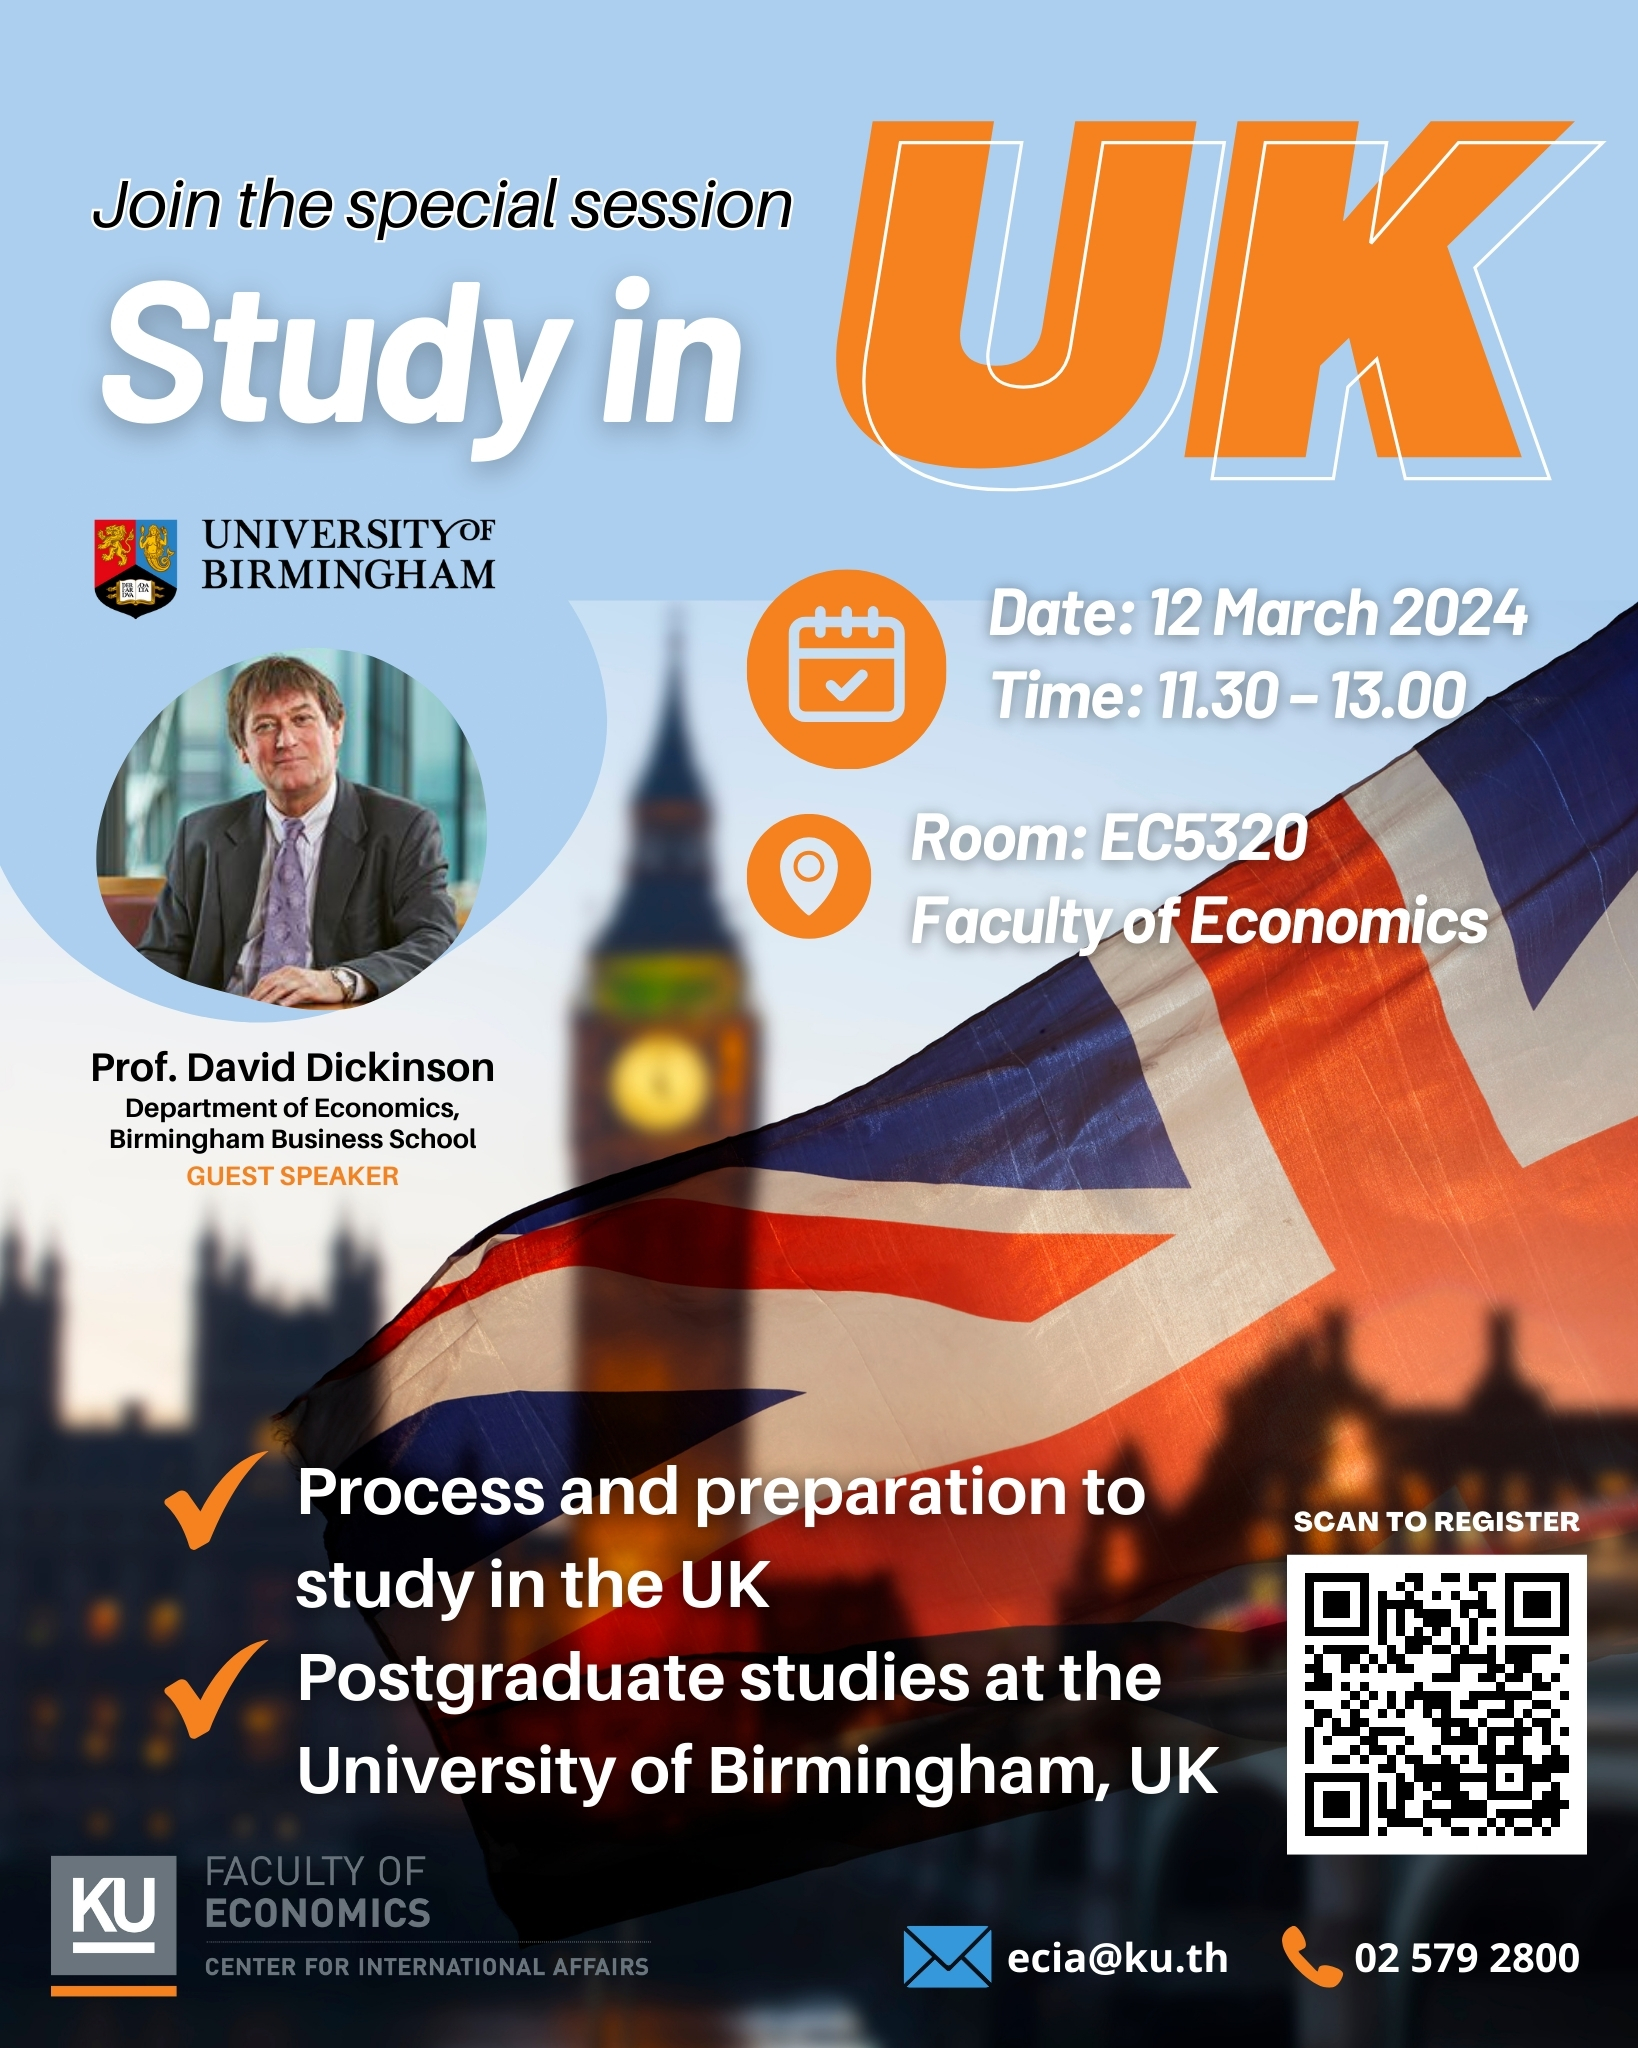 Join the special session: “Study in the UK” in March 12, 2024